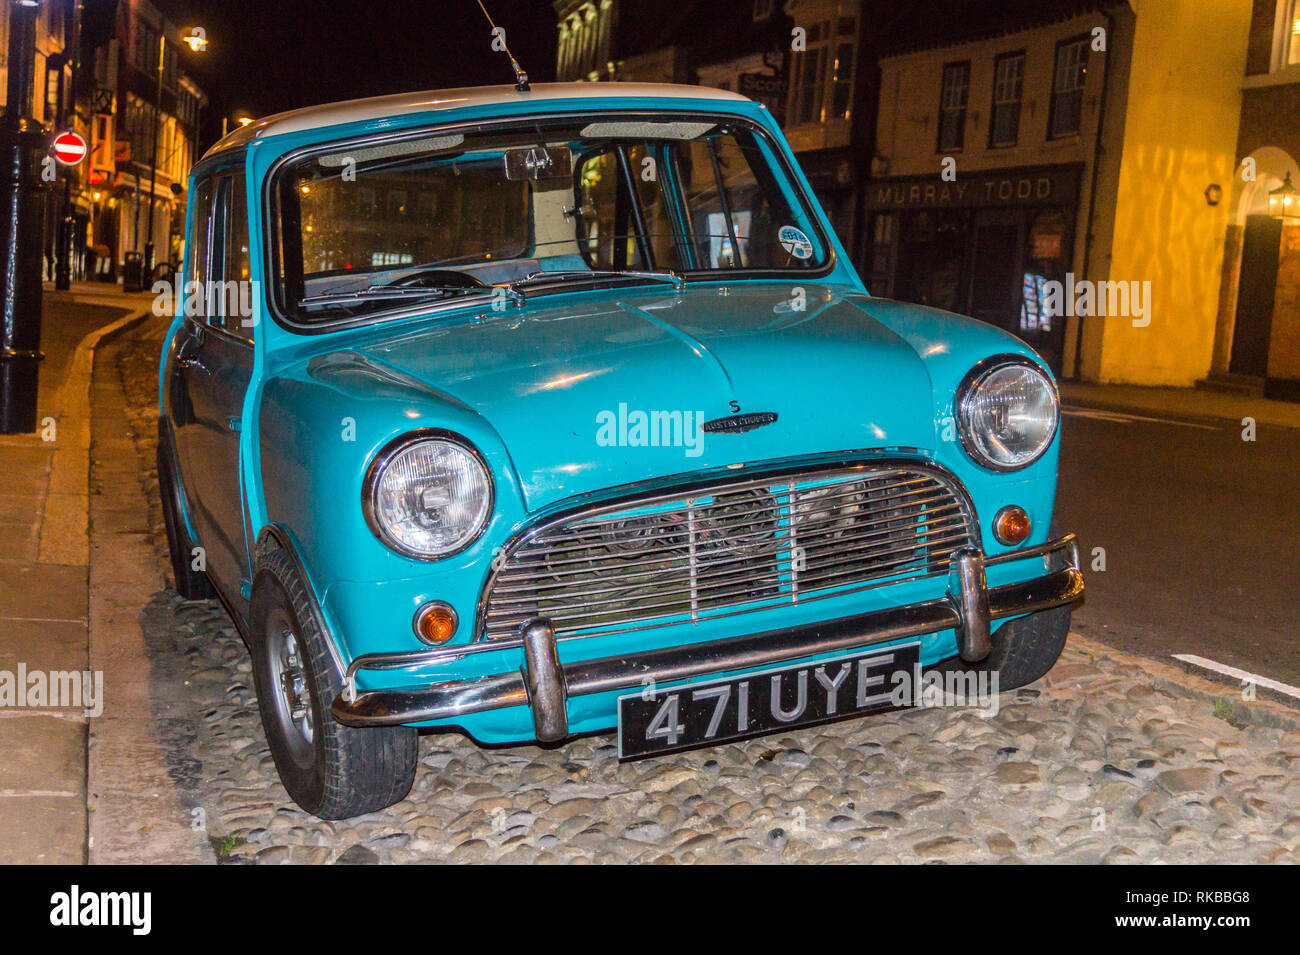 1961 Mini Cooper S classic car in turquoise, Beverley, East Riding ...